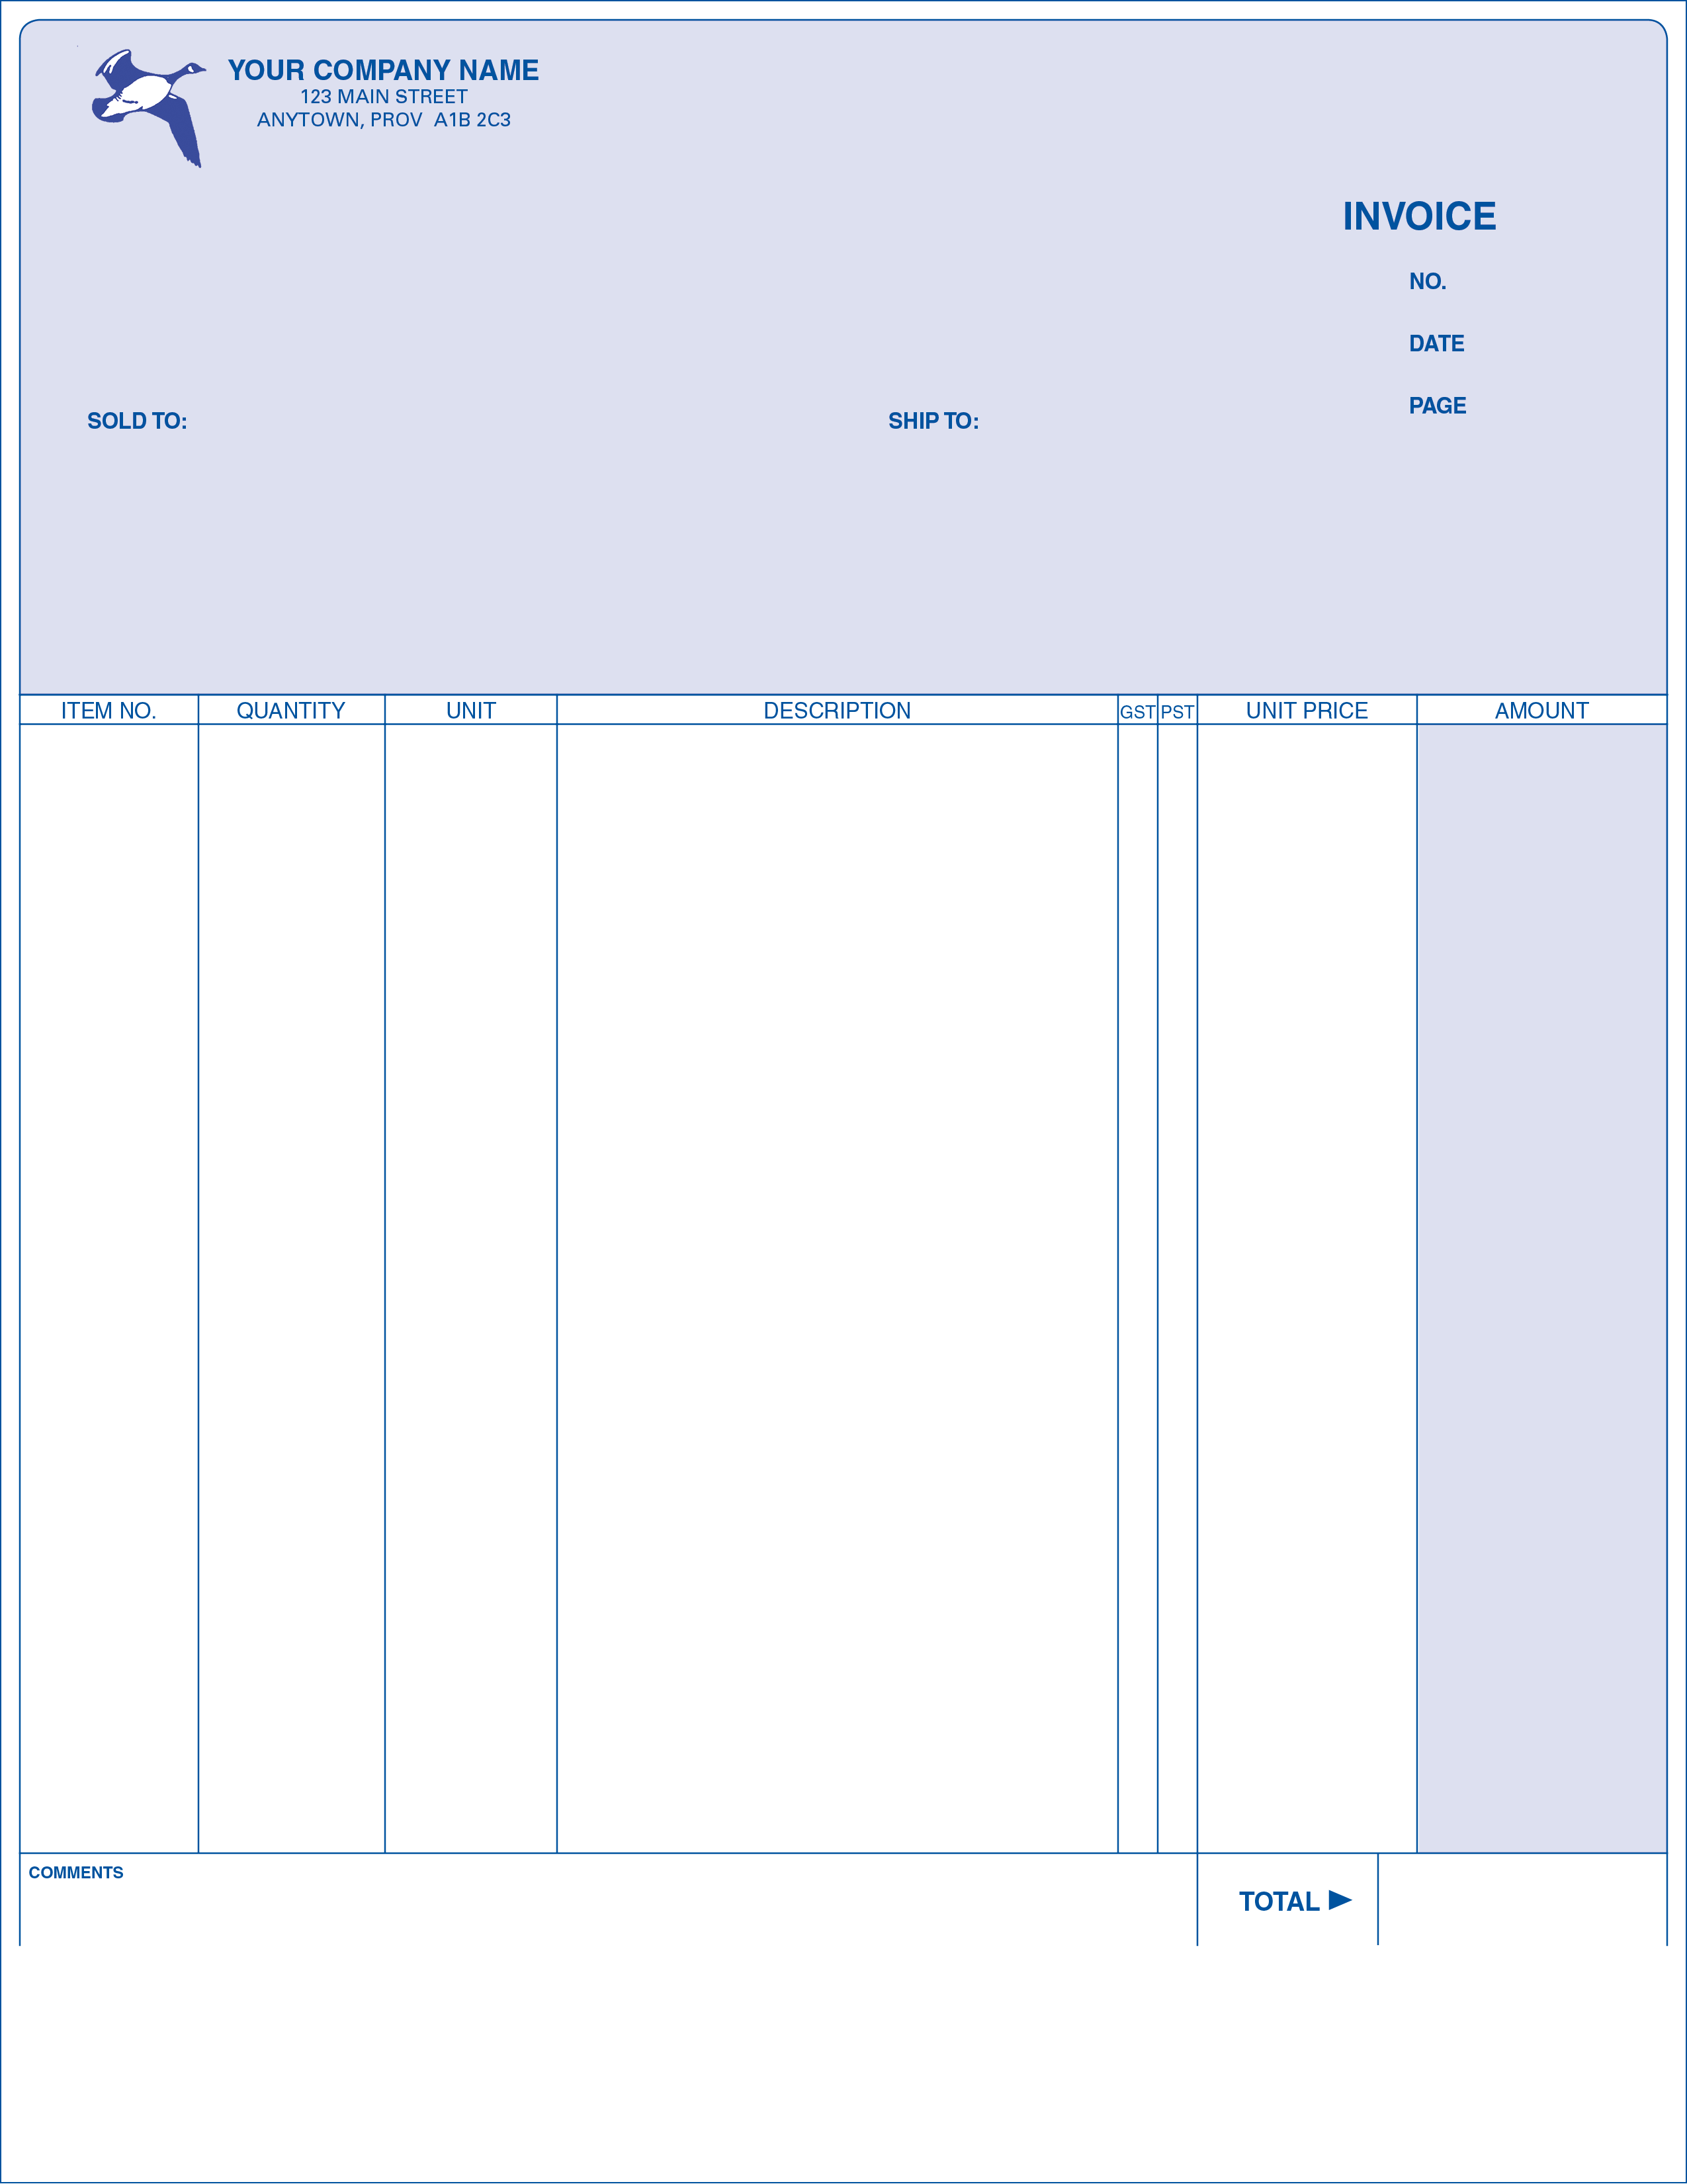 Invoice - Long Format